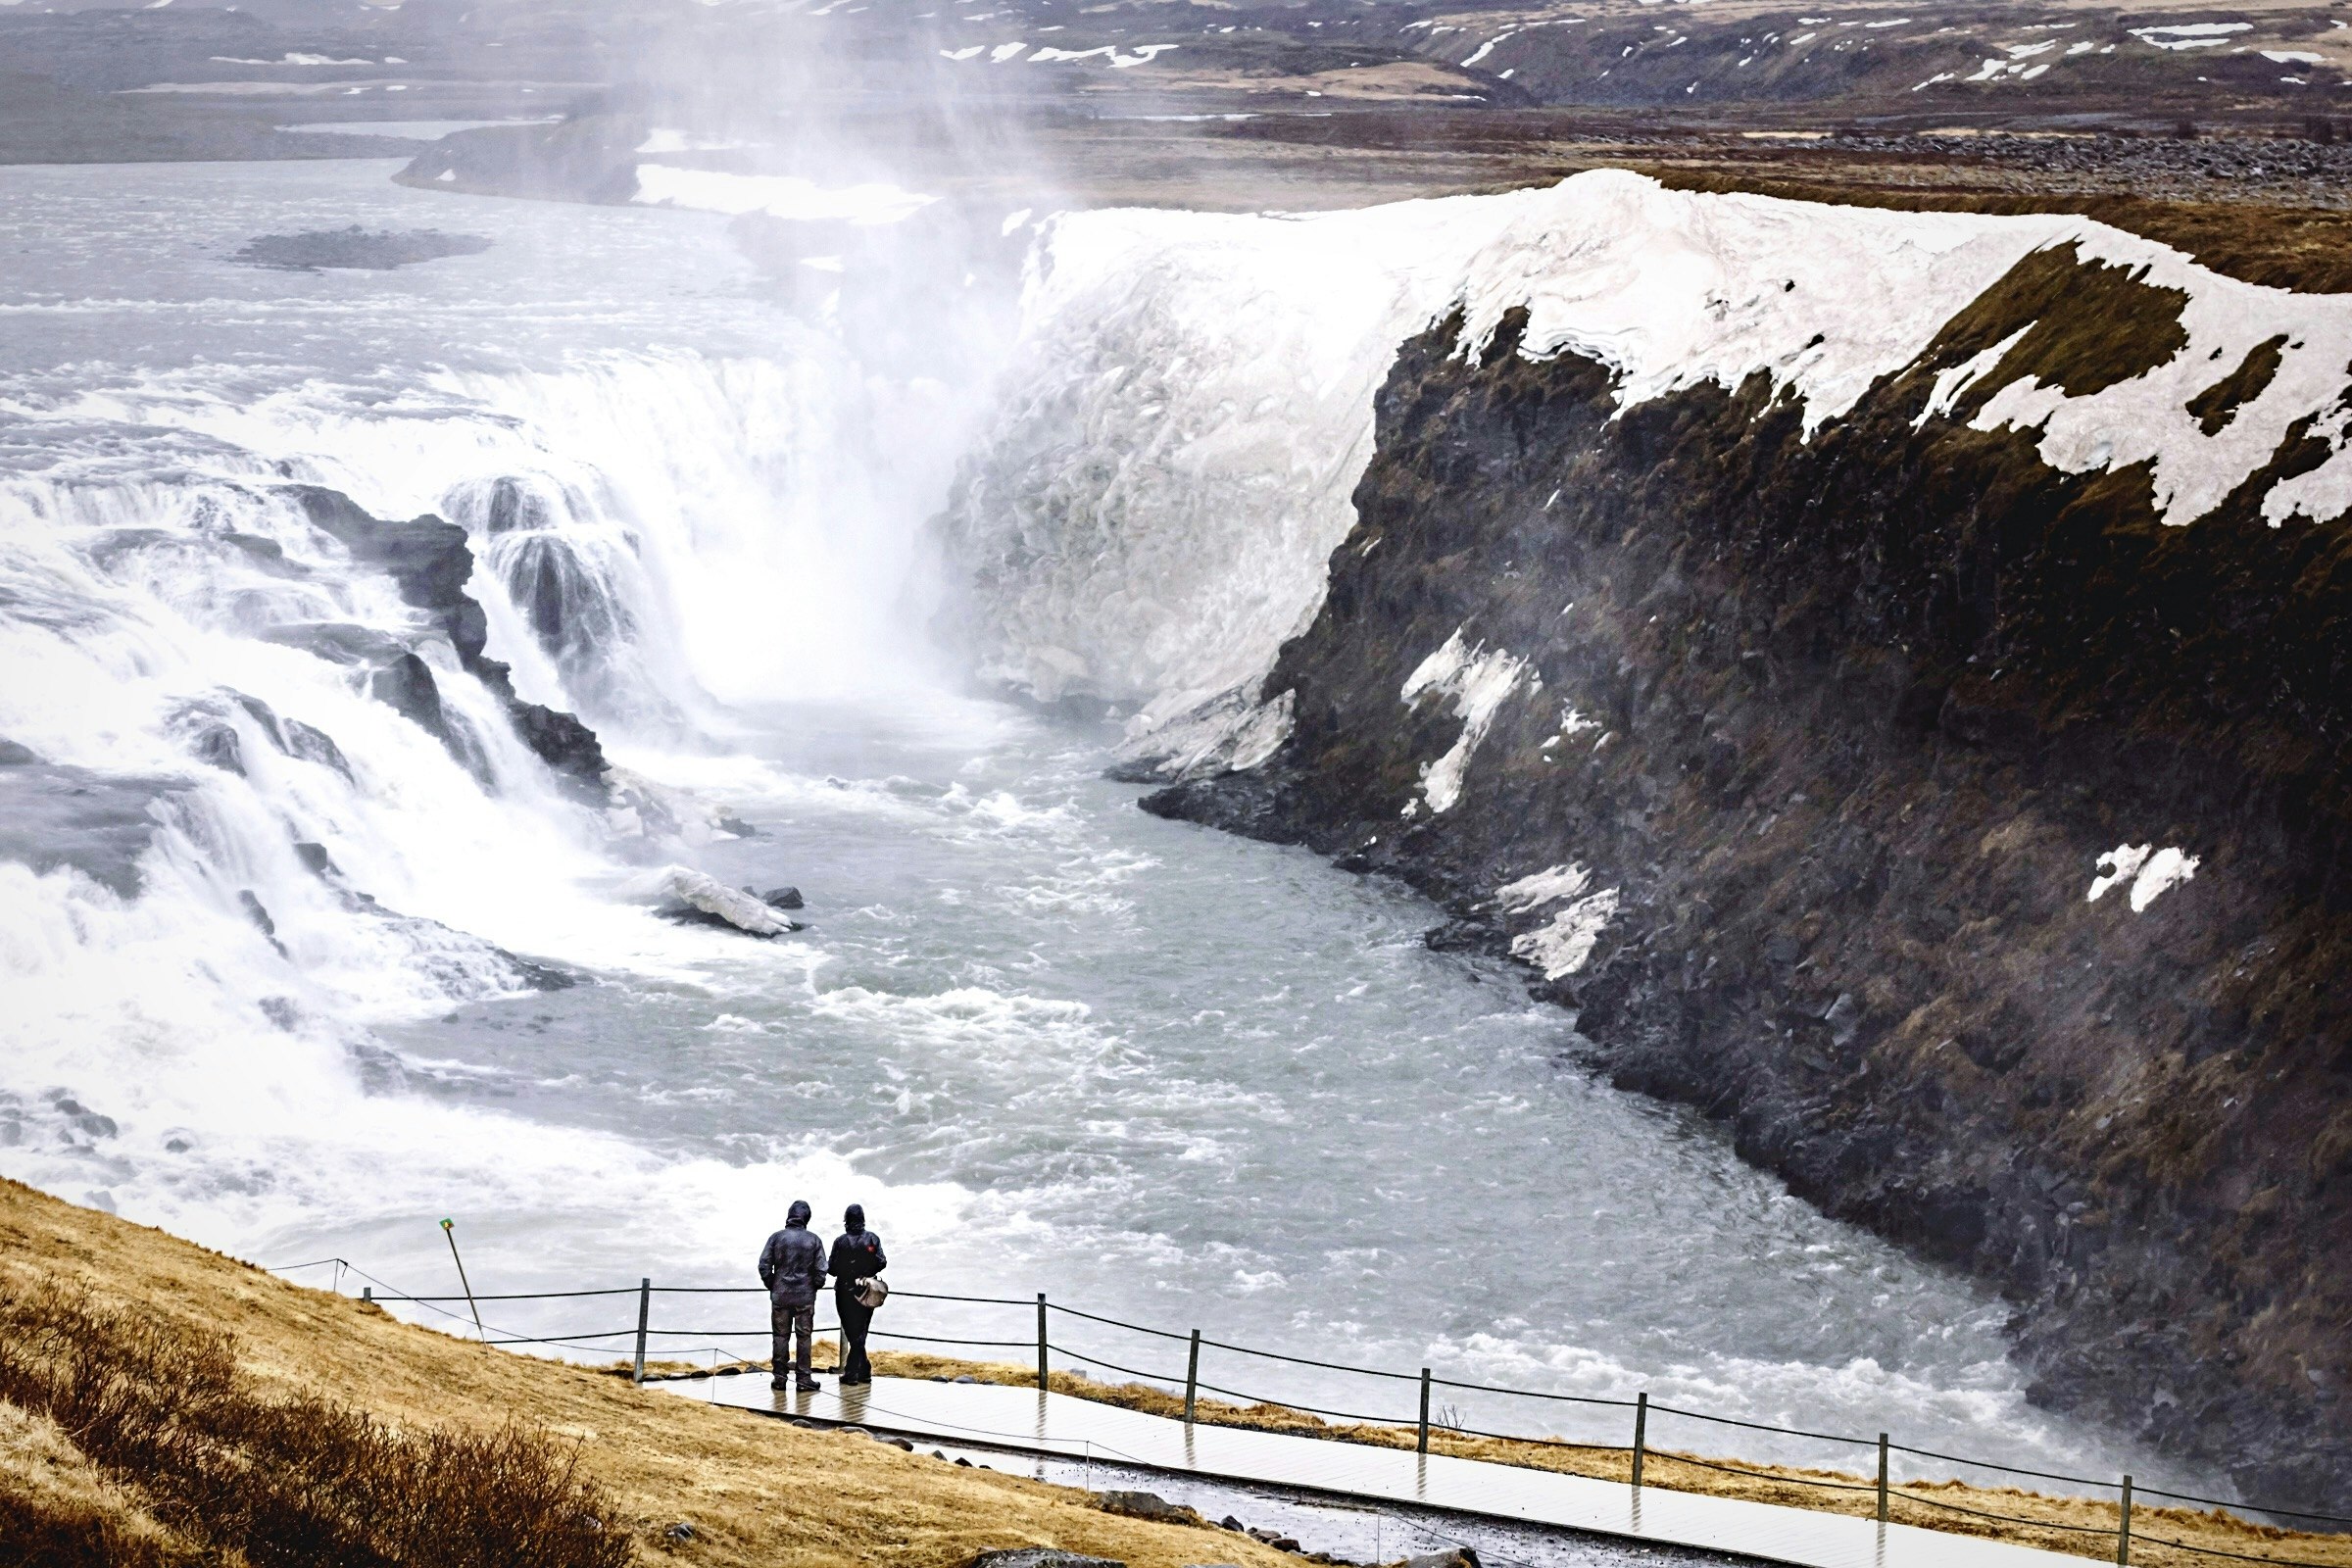 Two people stand overlooking Gullfloss waterfall in Iceland. The falls are huge, with vast amounts of water pouring from them into the lake below.